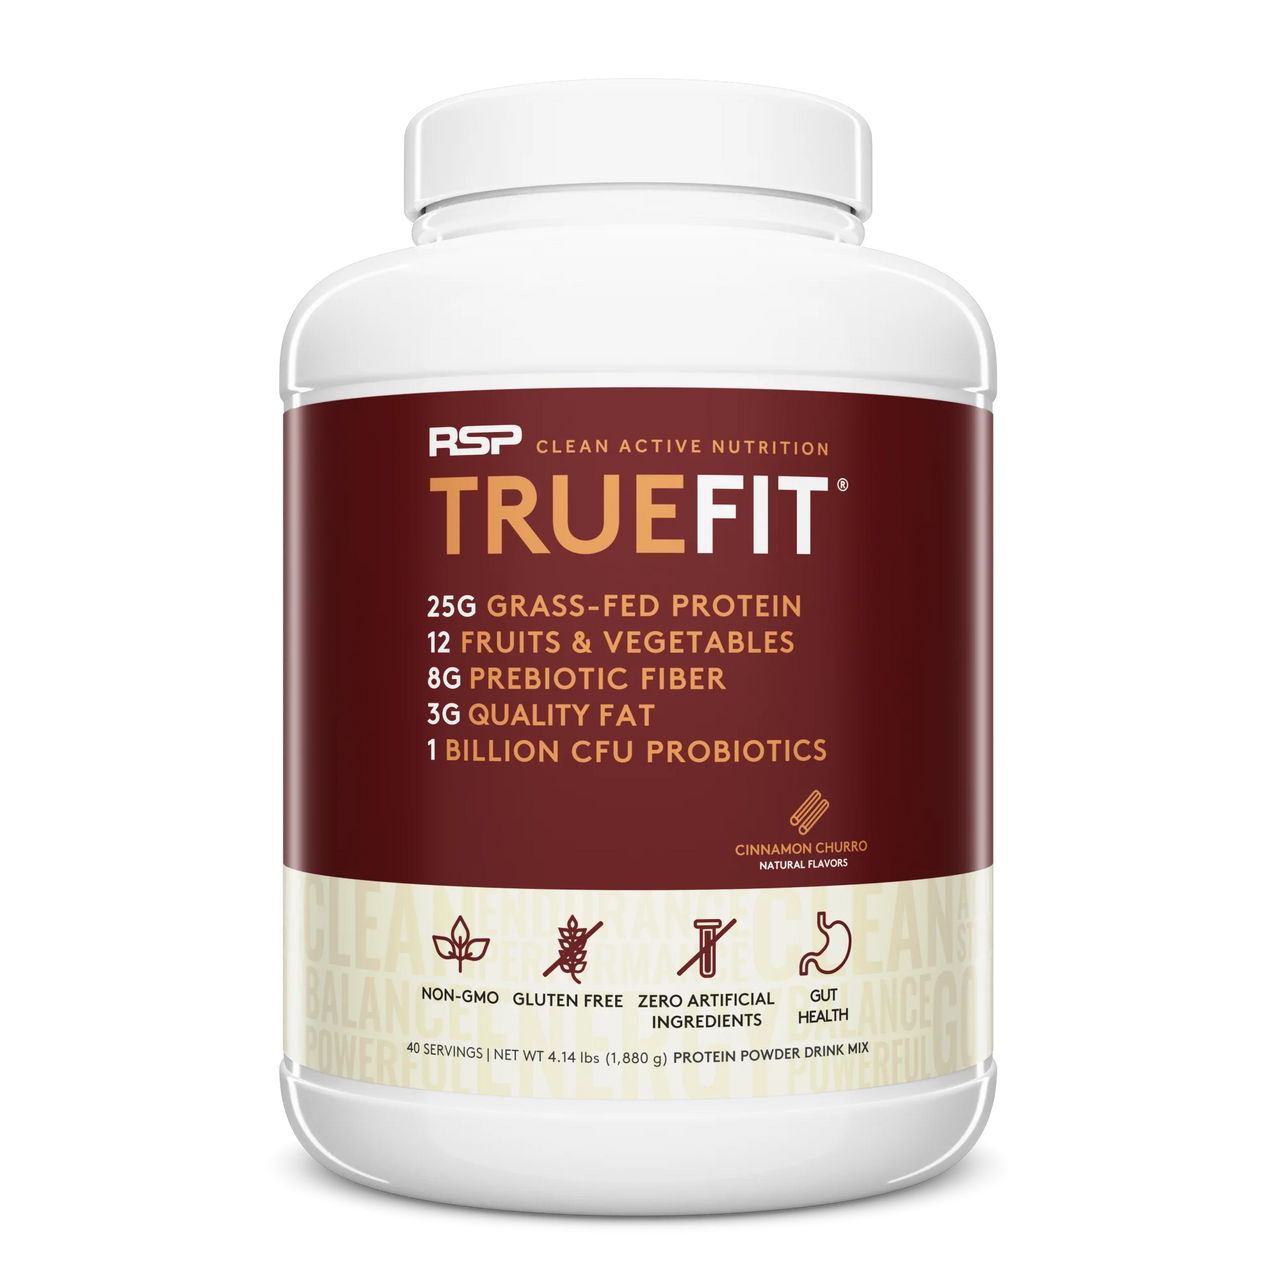 Truefit Meal Replacement Protein Powder (1.96 kg)